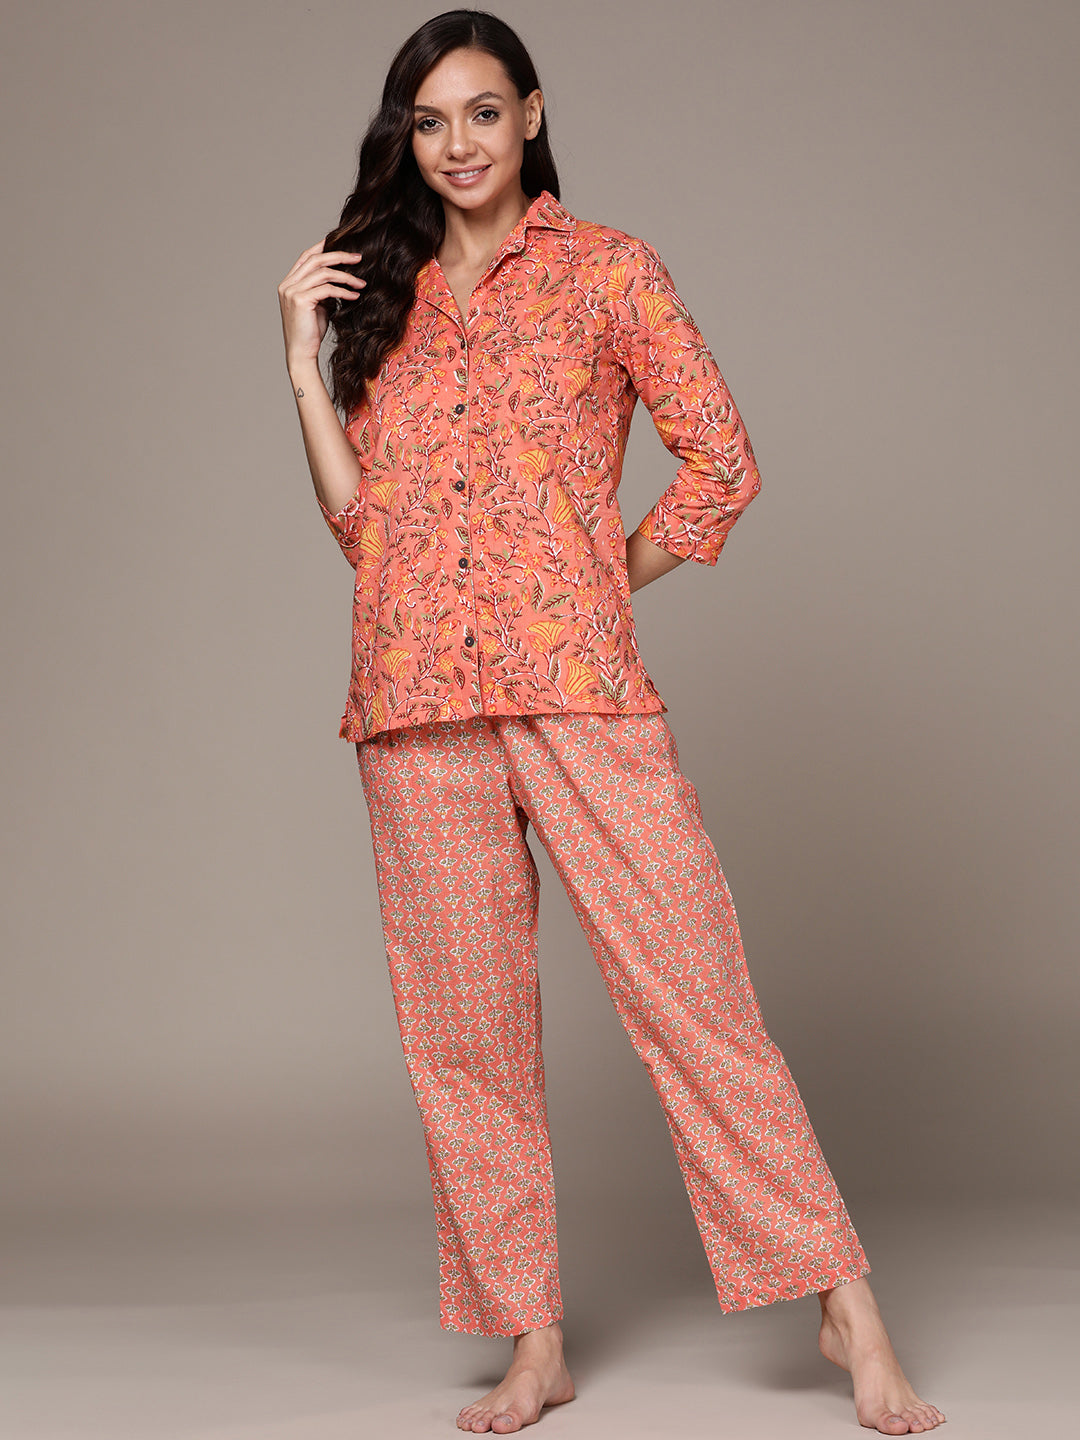 Women's's Coral Floral Printed Pure Cotton Night Suit